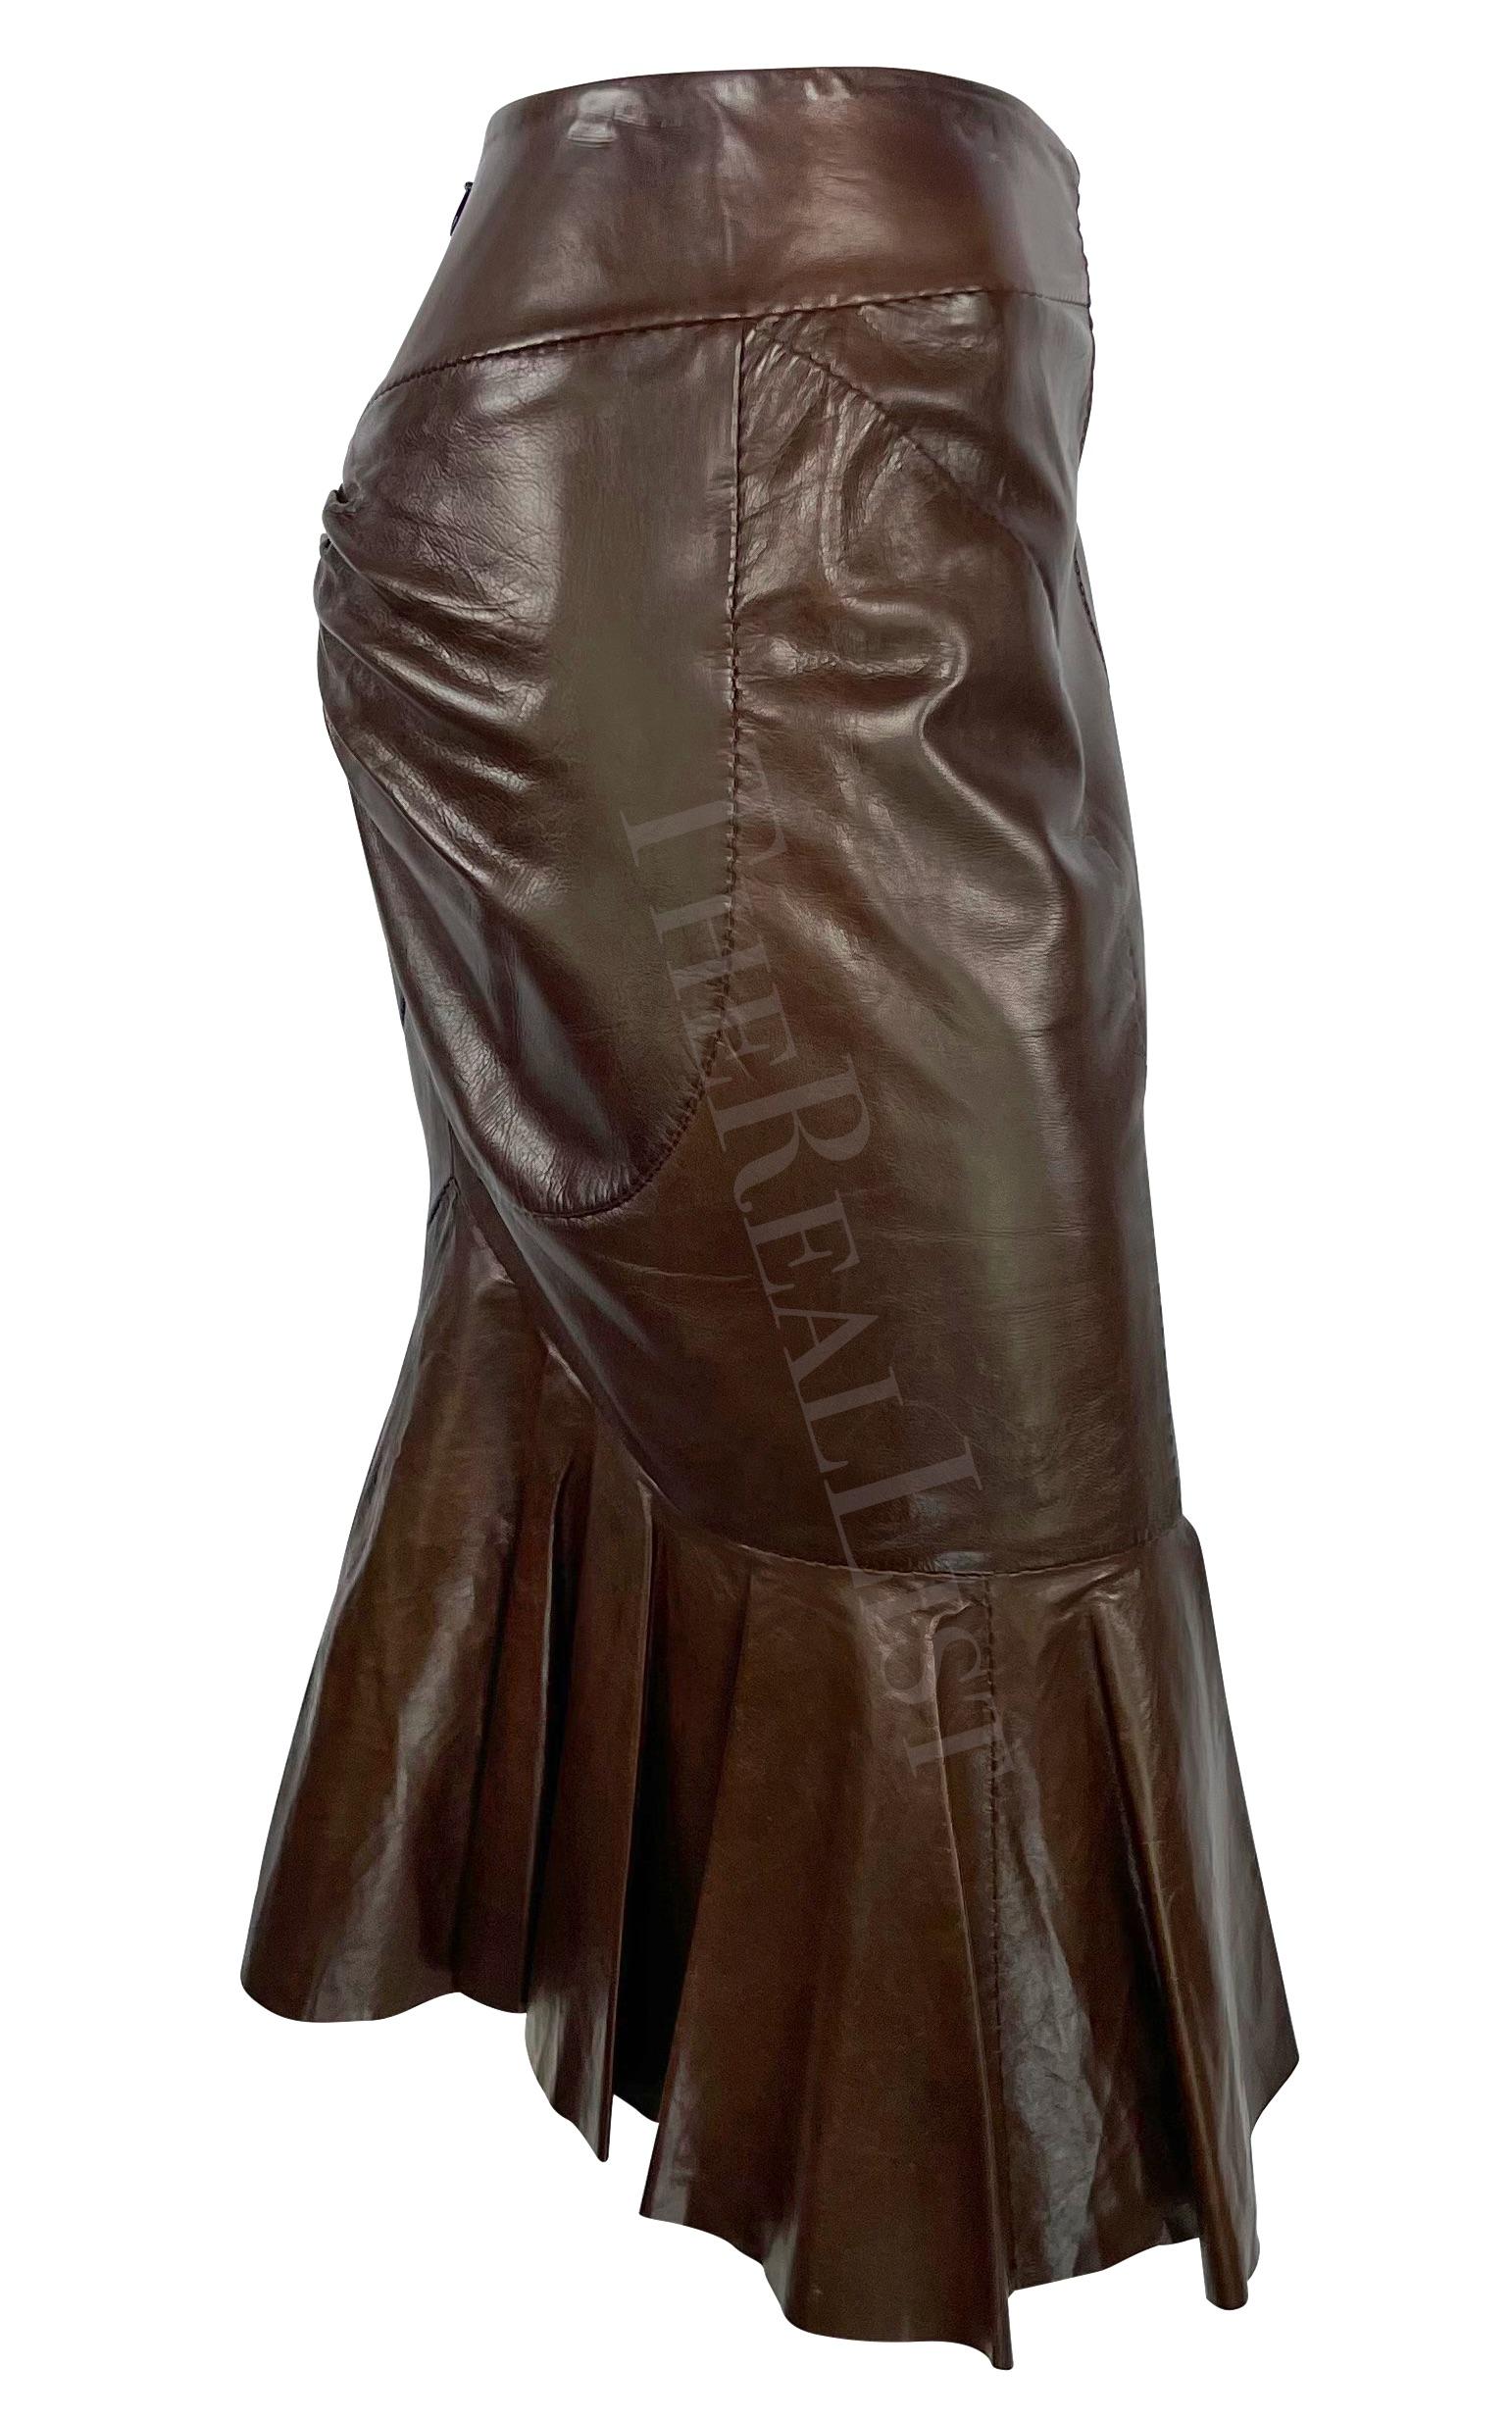 S/S 2003 Yves Saint Laurent by Tom Ford Anatomic Brown Leather Ruffle Skirt For Sale 4